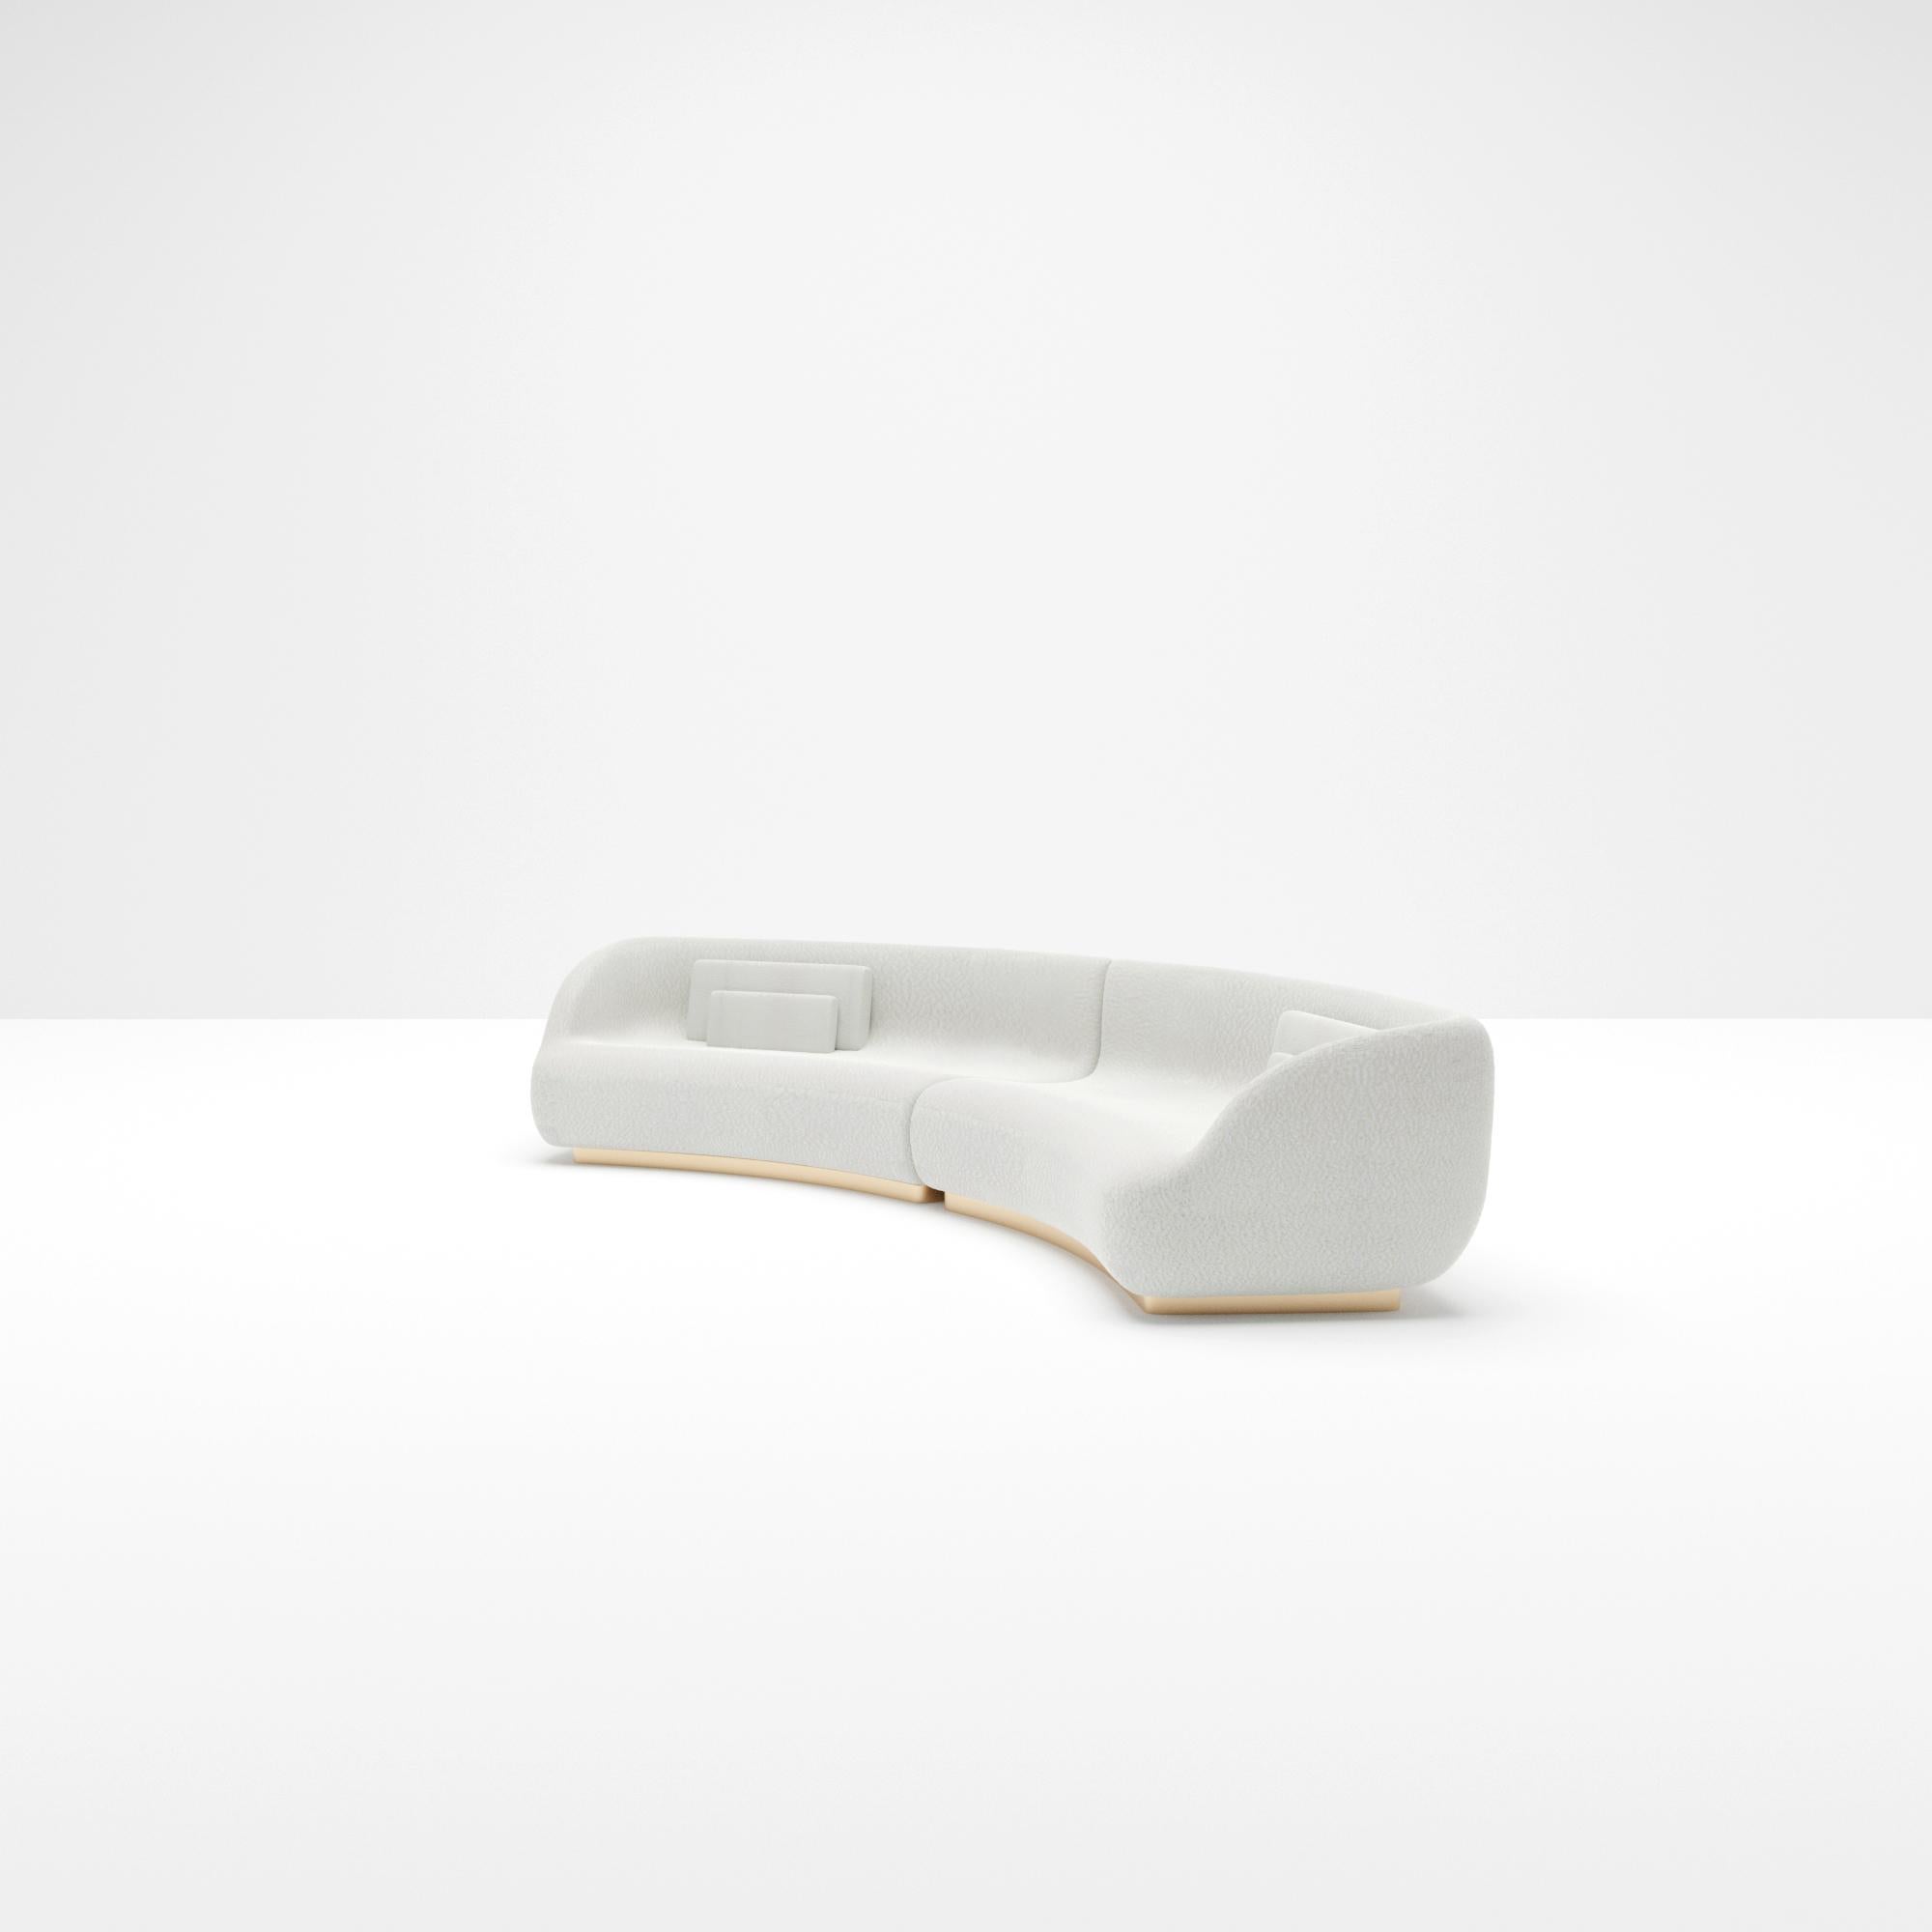 Organic Modern Demi-Lune, 21st Century Curved Design Dual Element Low Couch